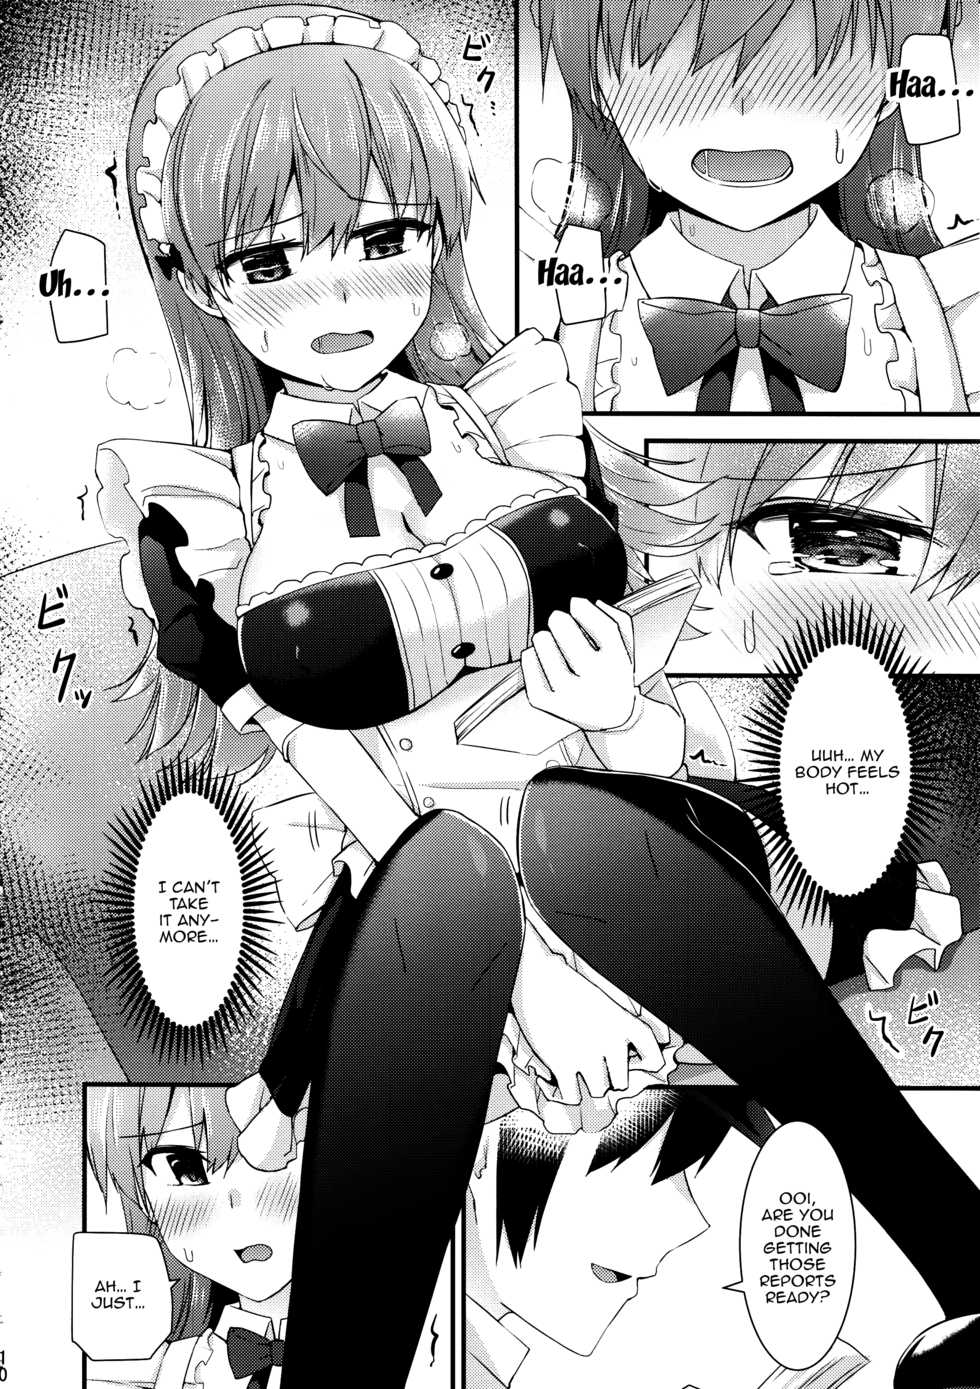 (FF27) [Rayzhai (Rayze)] Ooi! Maid Fuku o Kite miyou! | Ooi! Try On These Maid Clothes! (Kantai Collection -KanColle-) [English] {Doujins.com} - Page 11